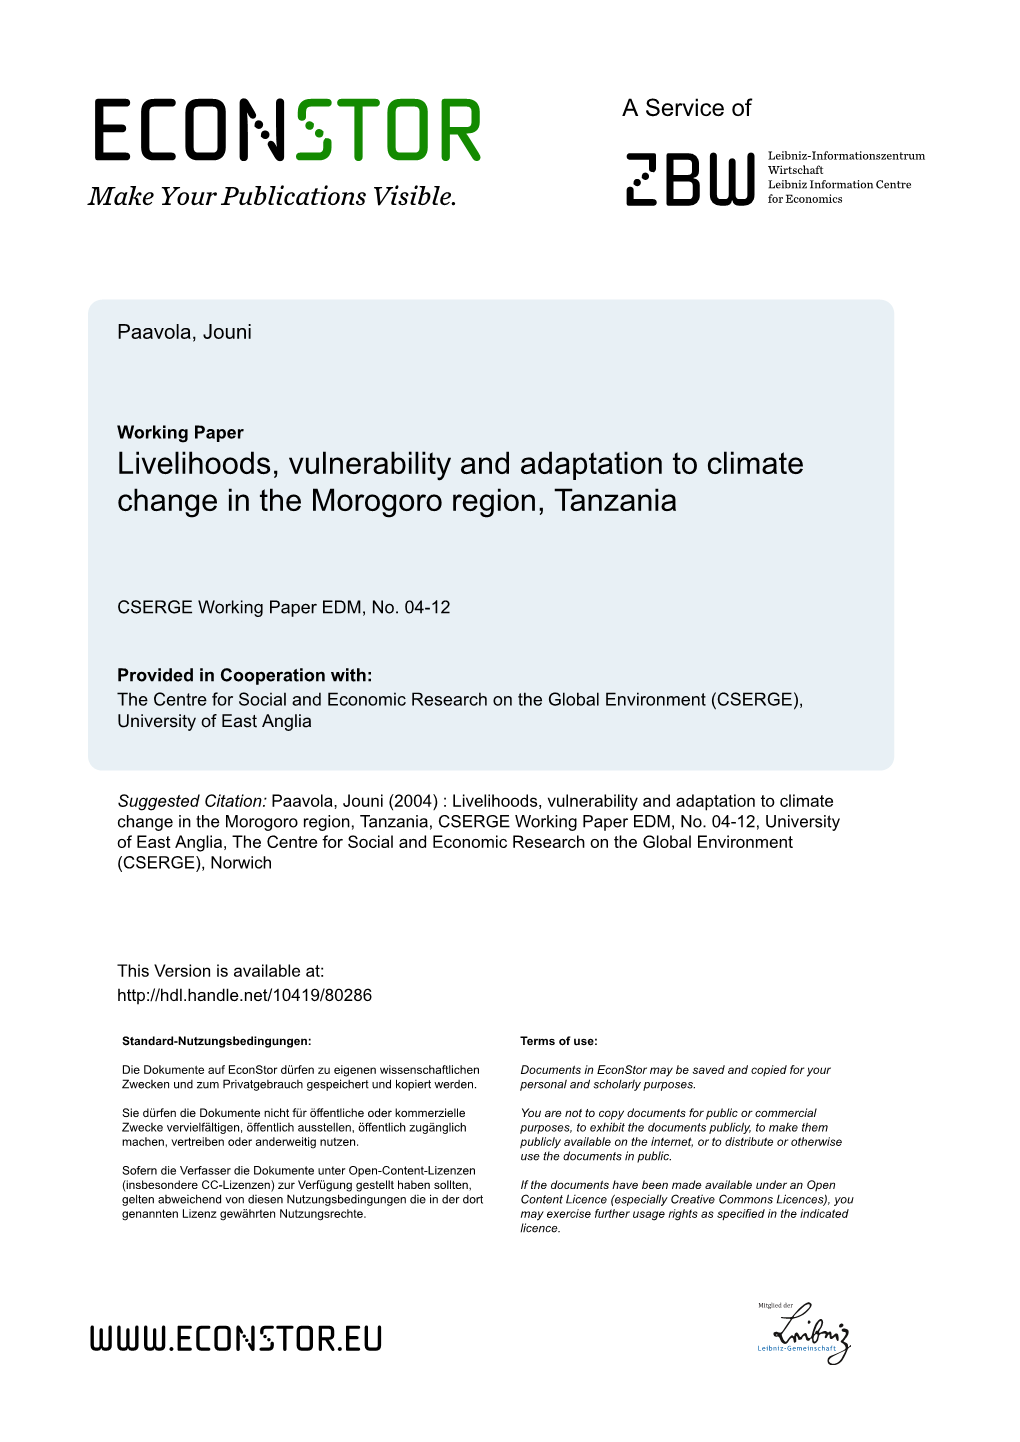 Livelihoods, Vulnerability and Adaptation to Climate Change in the Morogoro Region, Tanzania